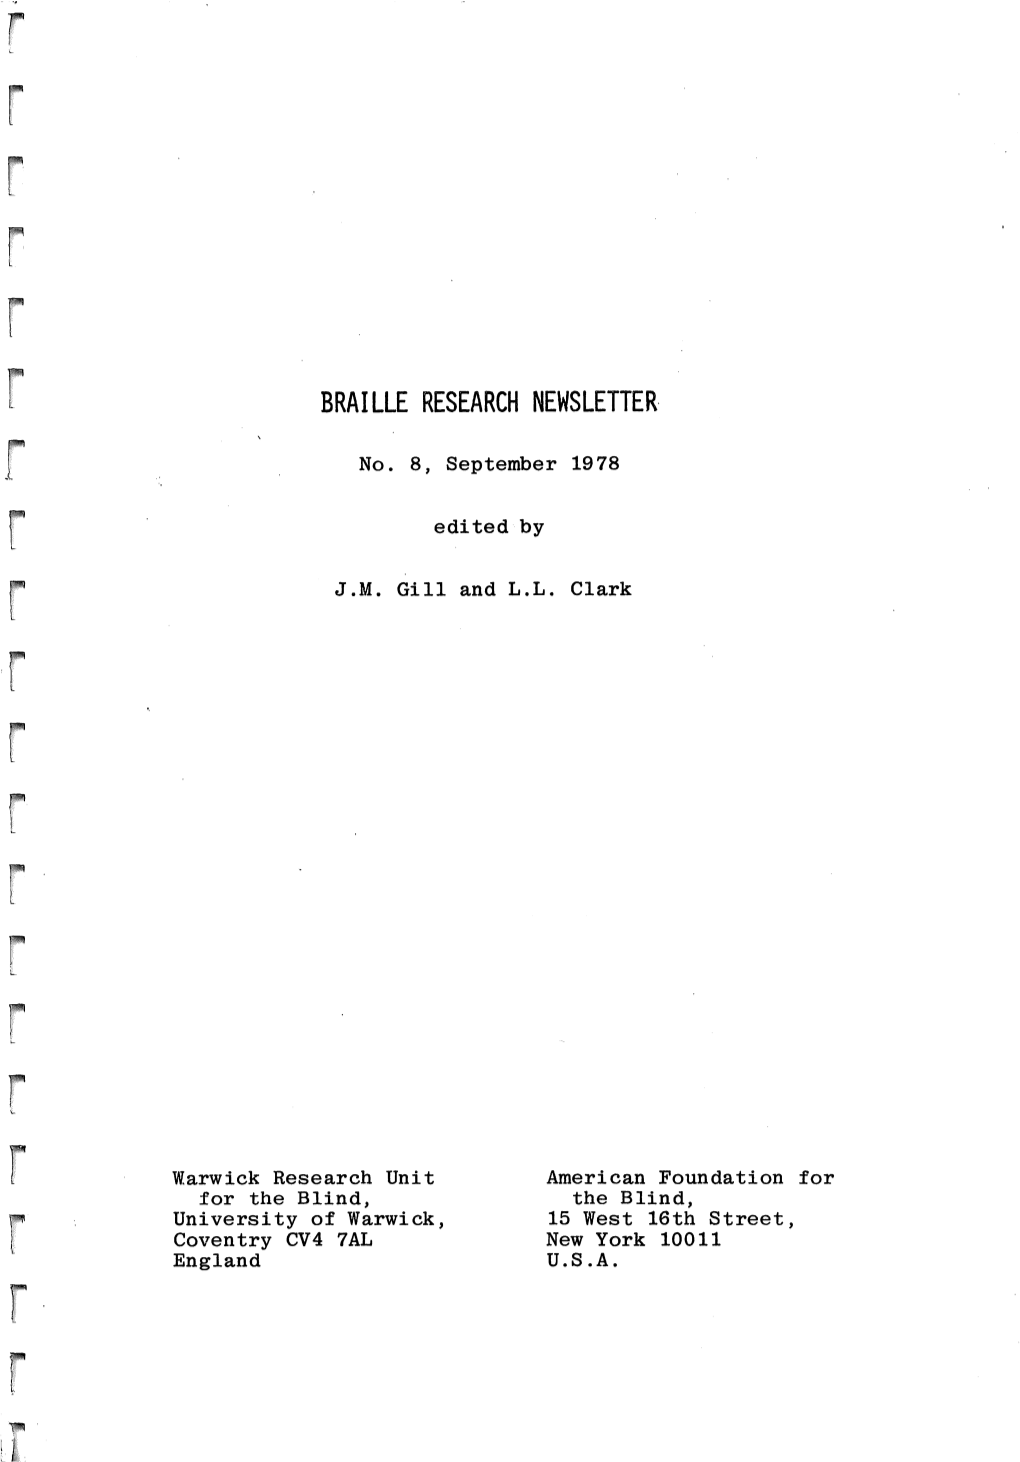 Braille Research Newsletter #8, Sept 1978